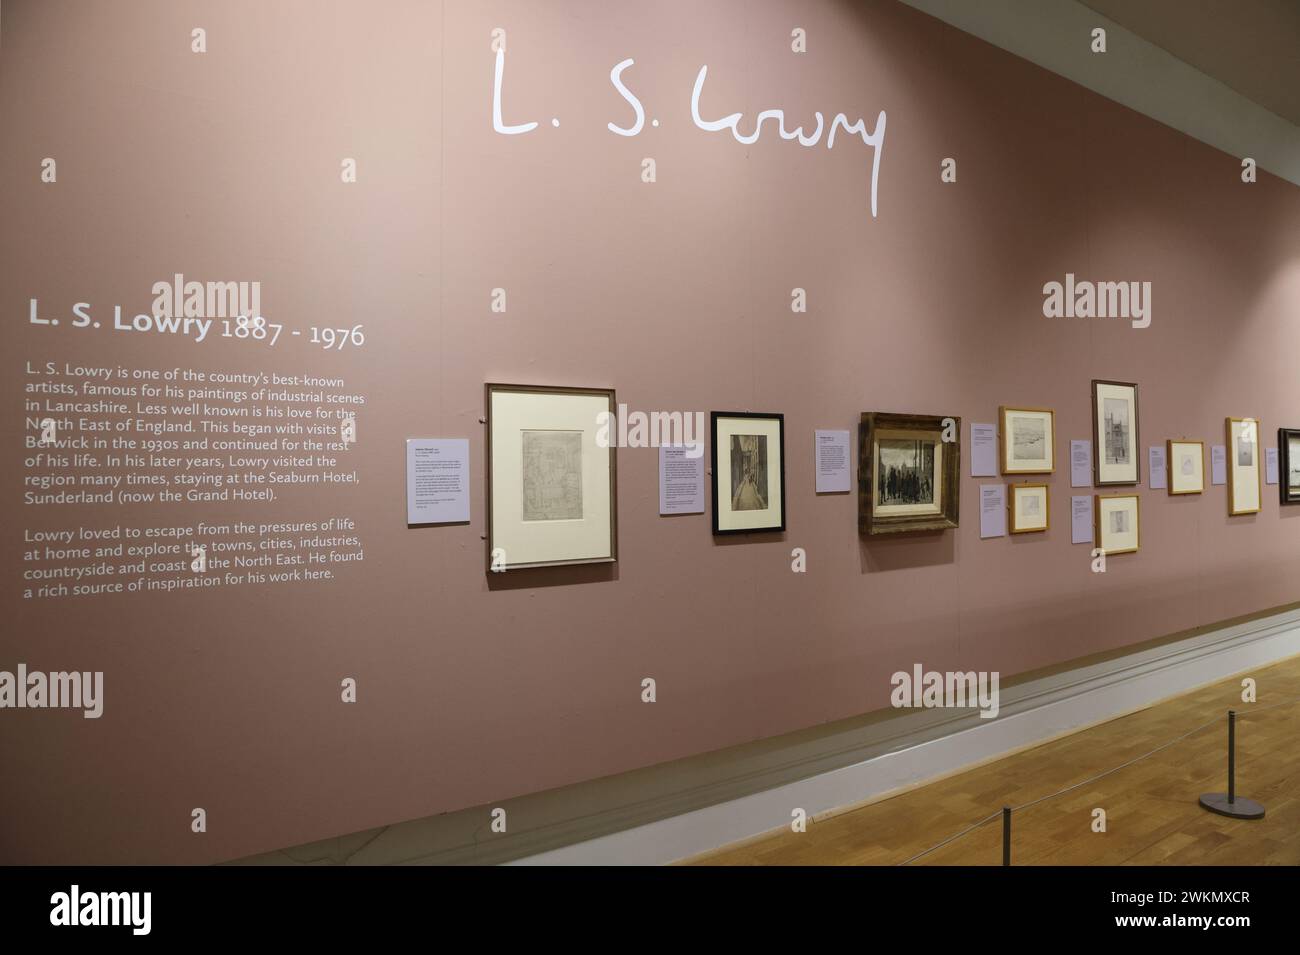 When in Sunderland artist L.S. Lowry often visited the Museum & Art Gallery which now houses a collection of his paintings, in Tyne&Wear, NE England. Stock Photo